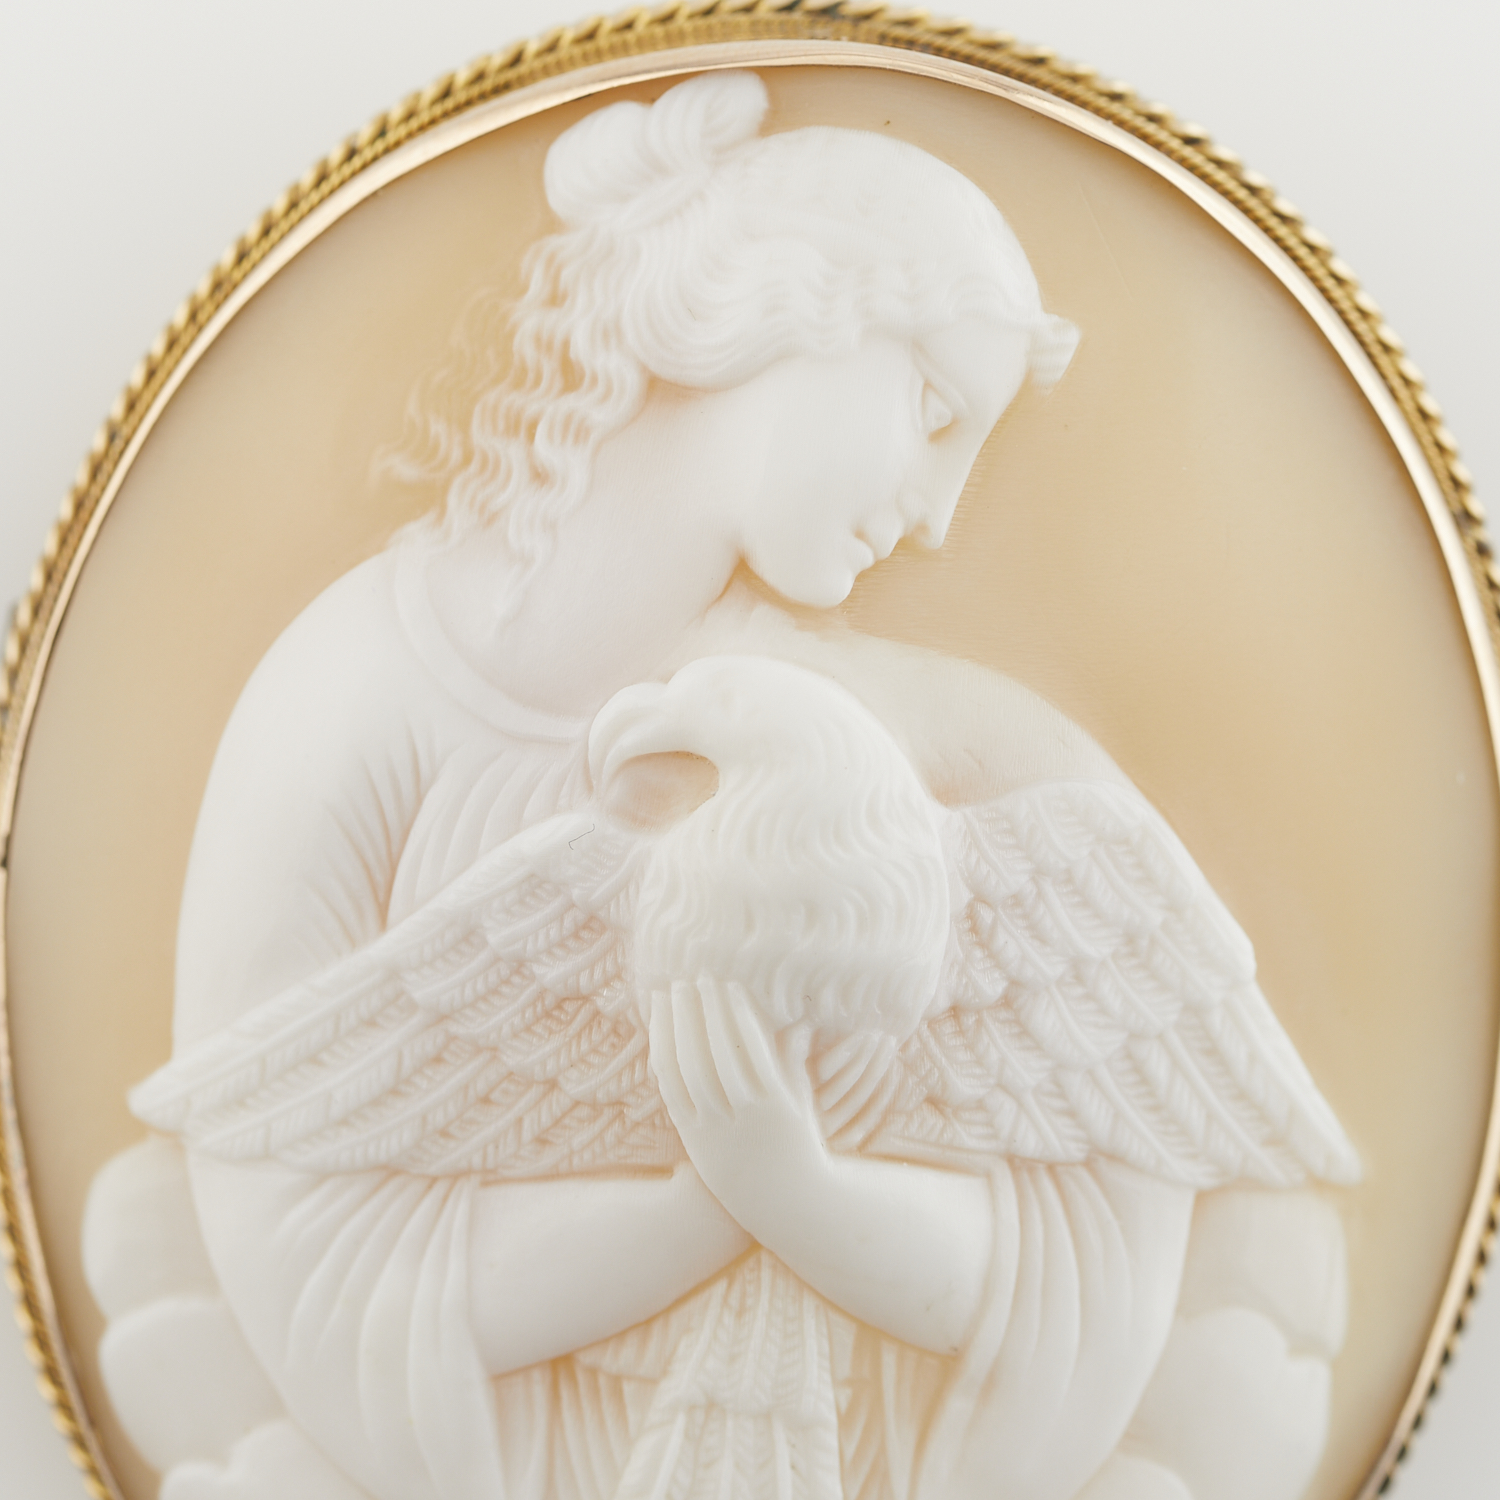 English 9ct Gold Cameo Brooch Depicting Hebe - Image 7 of 7